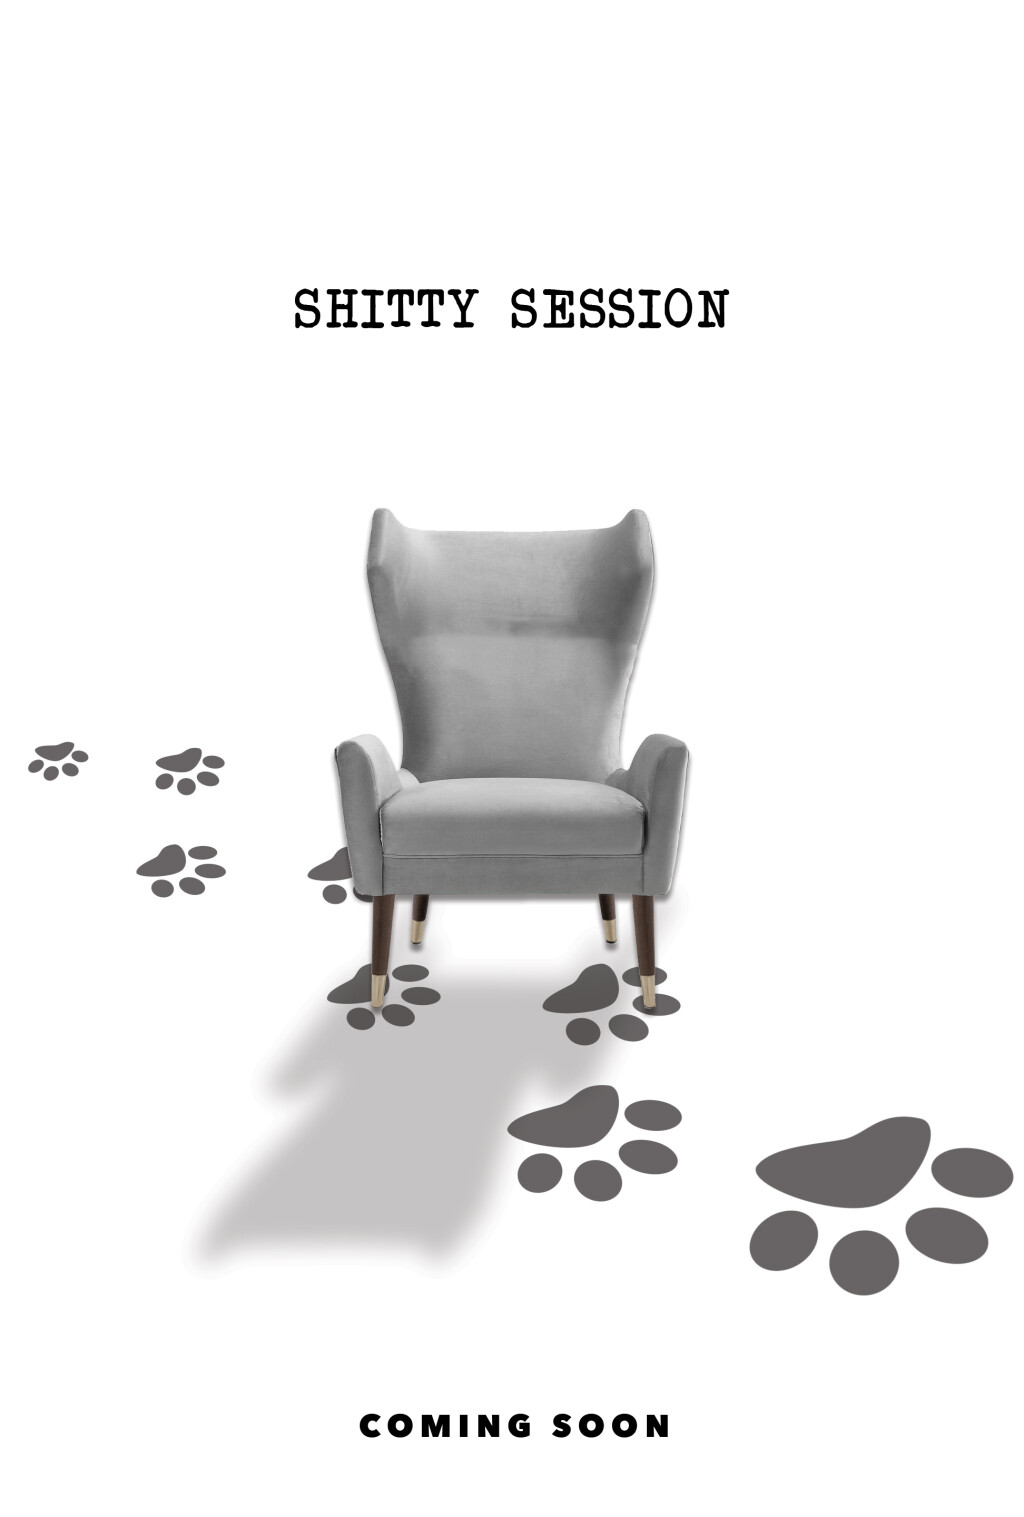 Filmposter for Shitty Session 